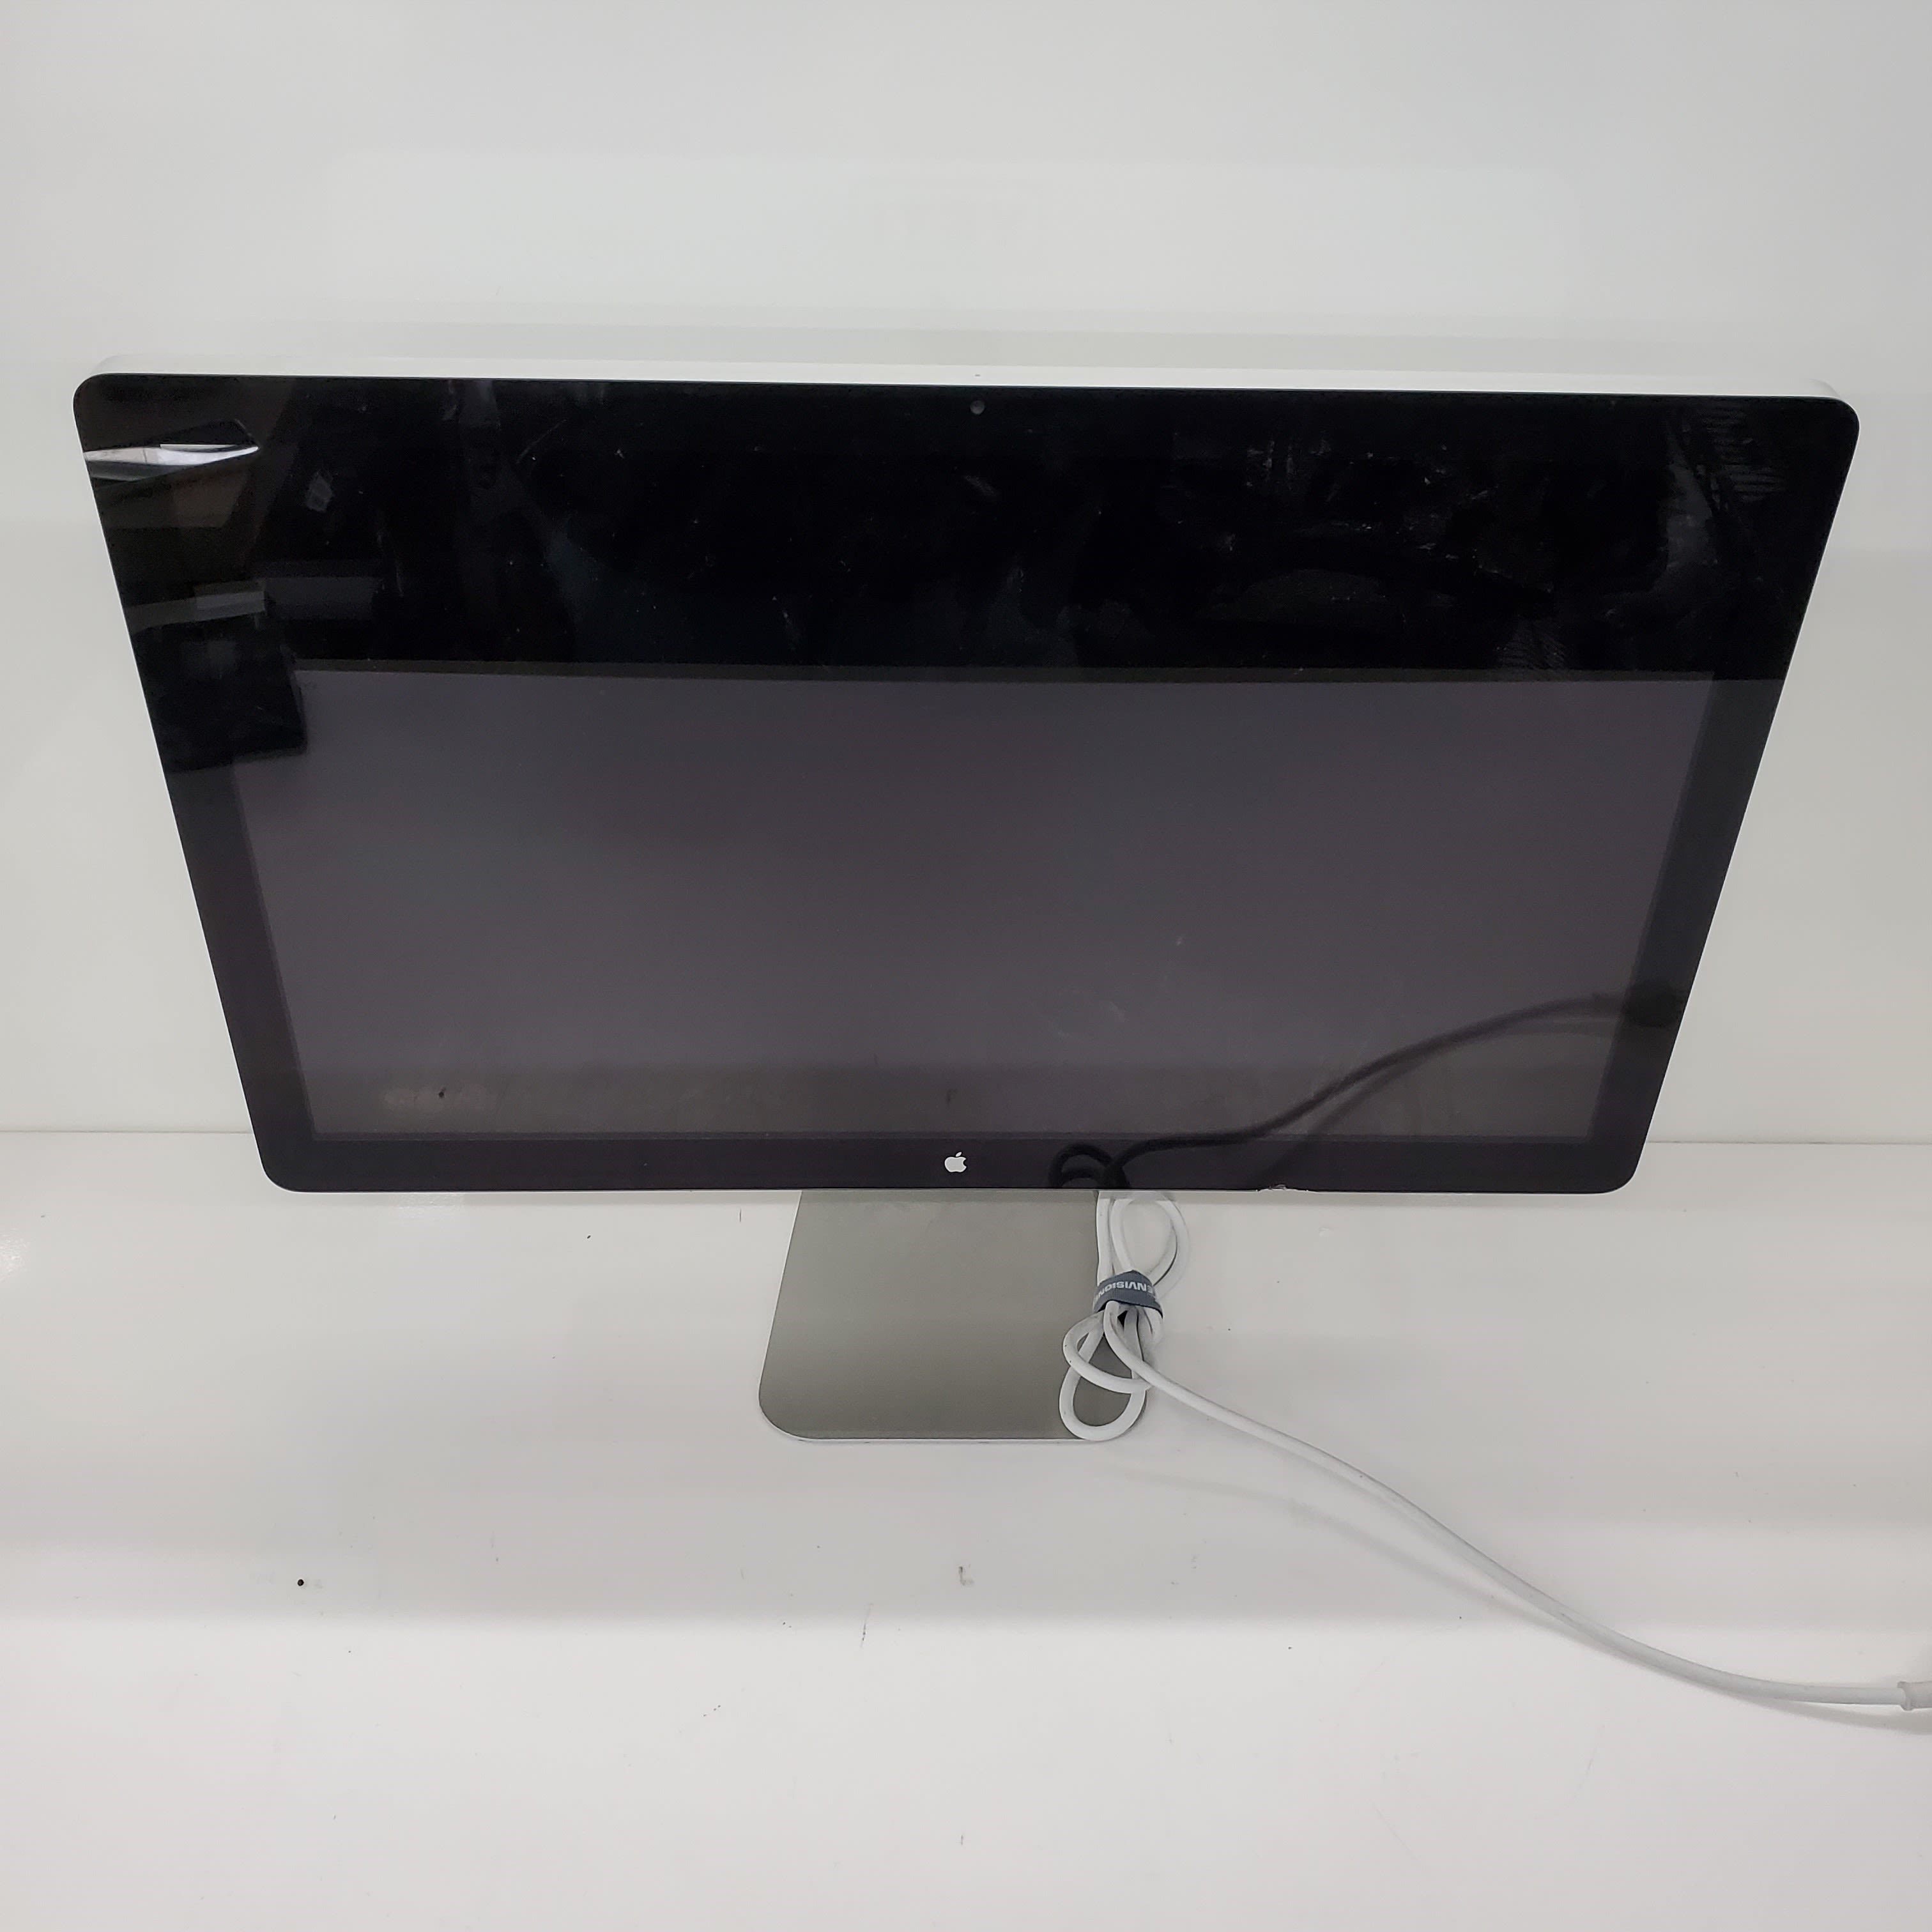 Buy the Apple Thunderbolt Display Model A1407 Untested P/R 